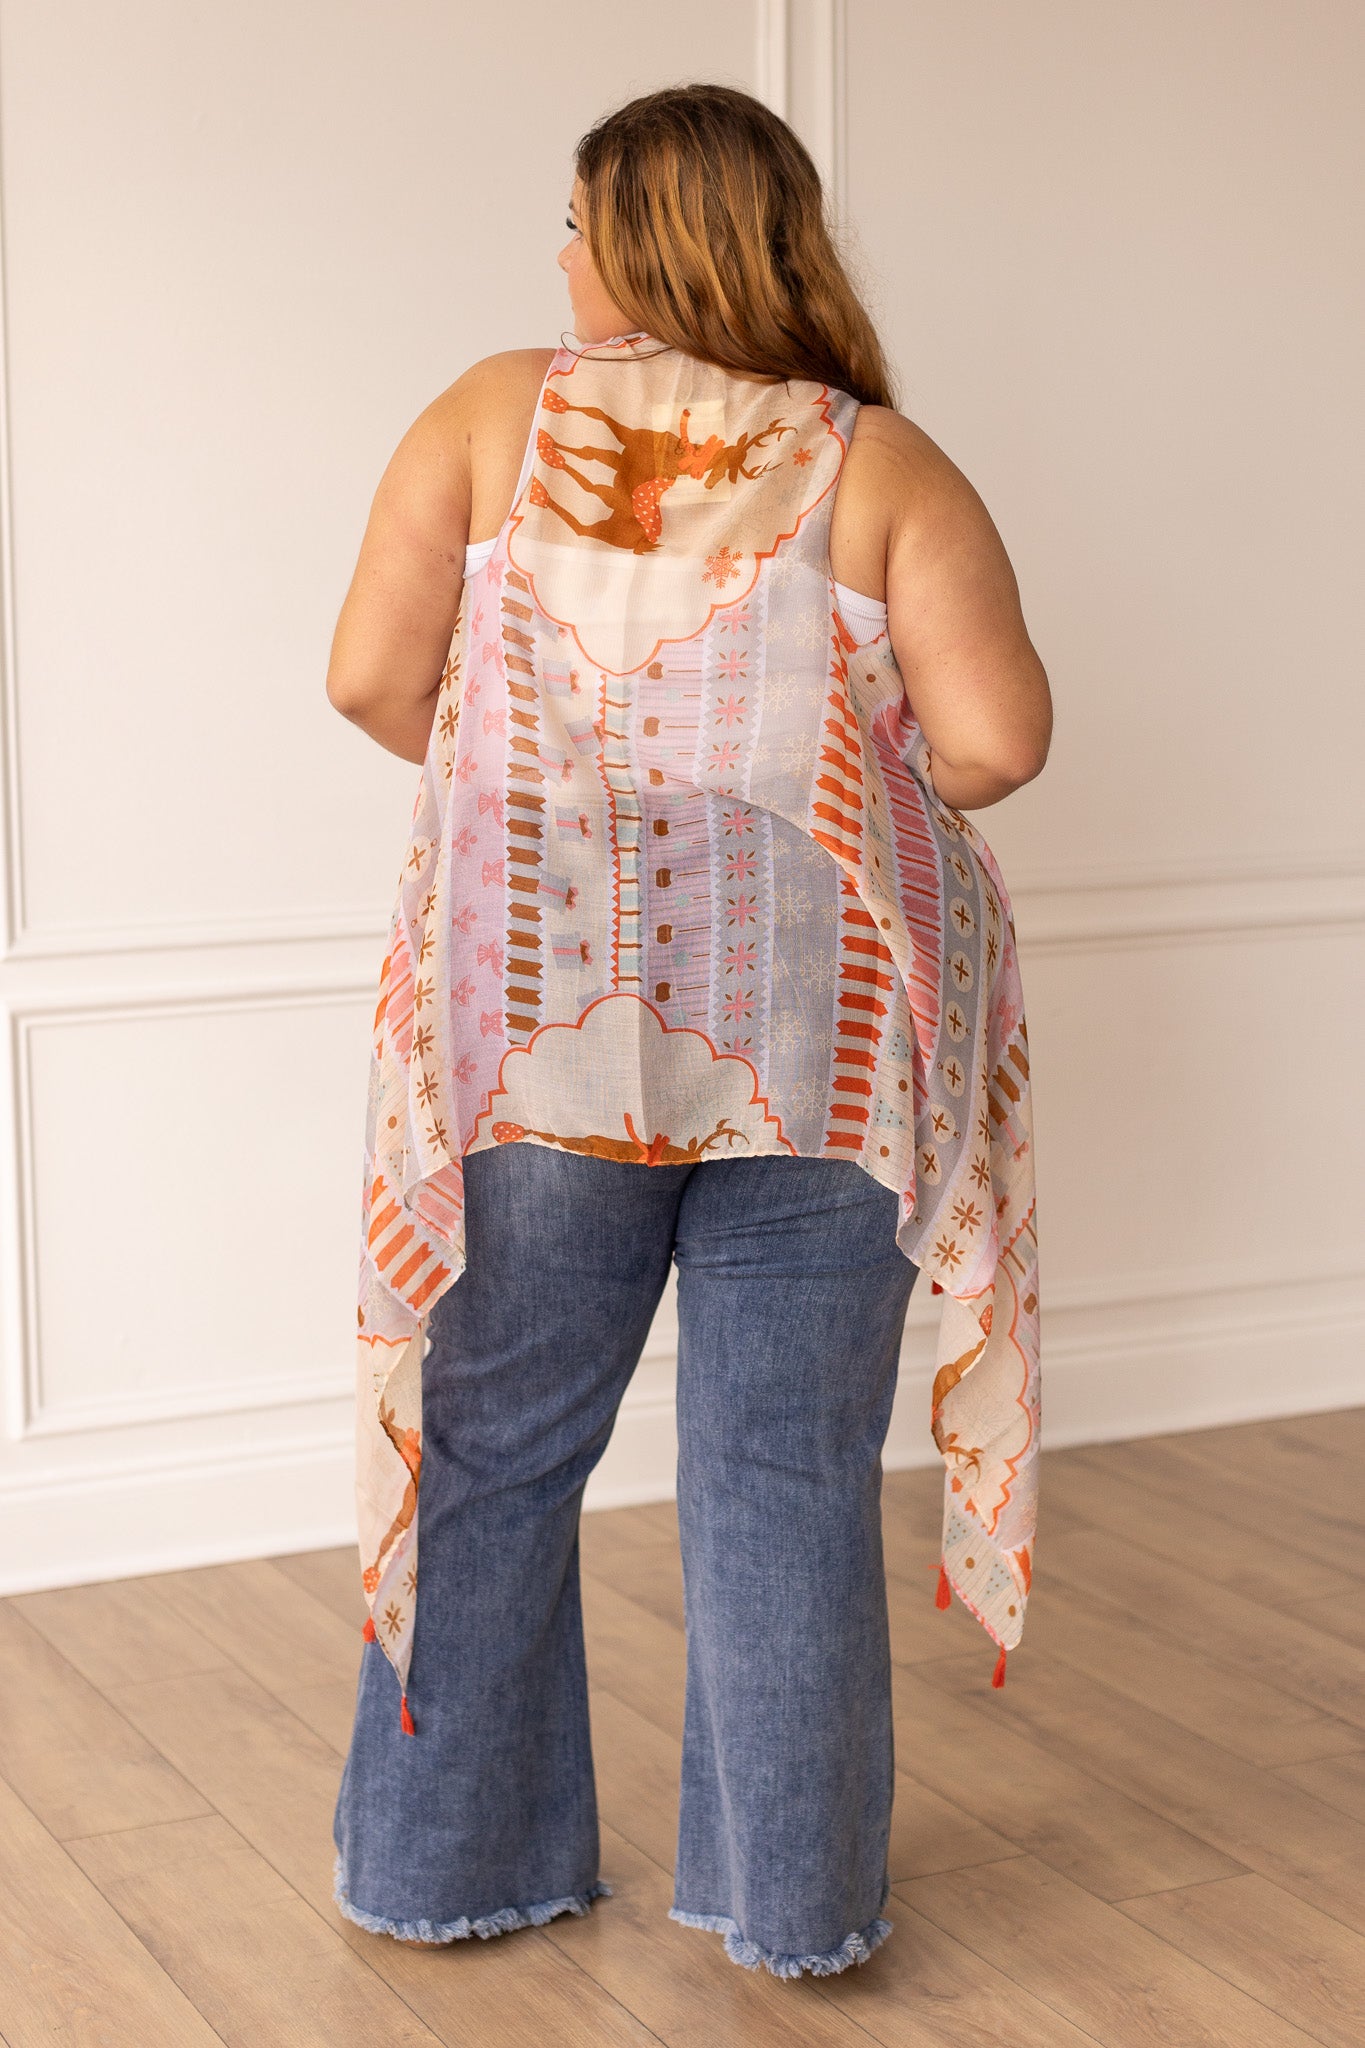 The Peachy Prancer Christmas Cover Up with Peach Tassels